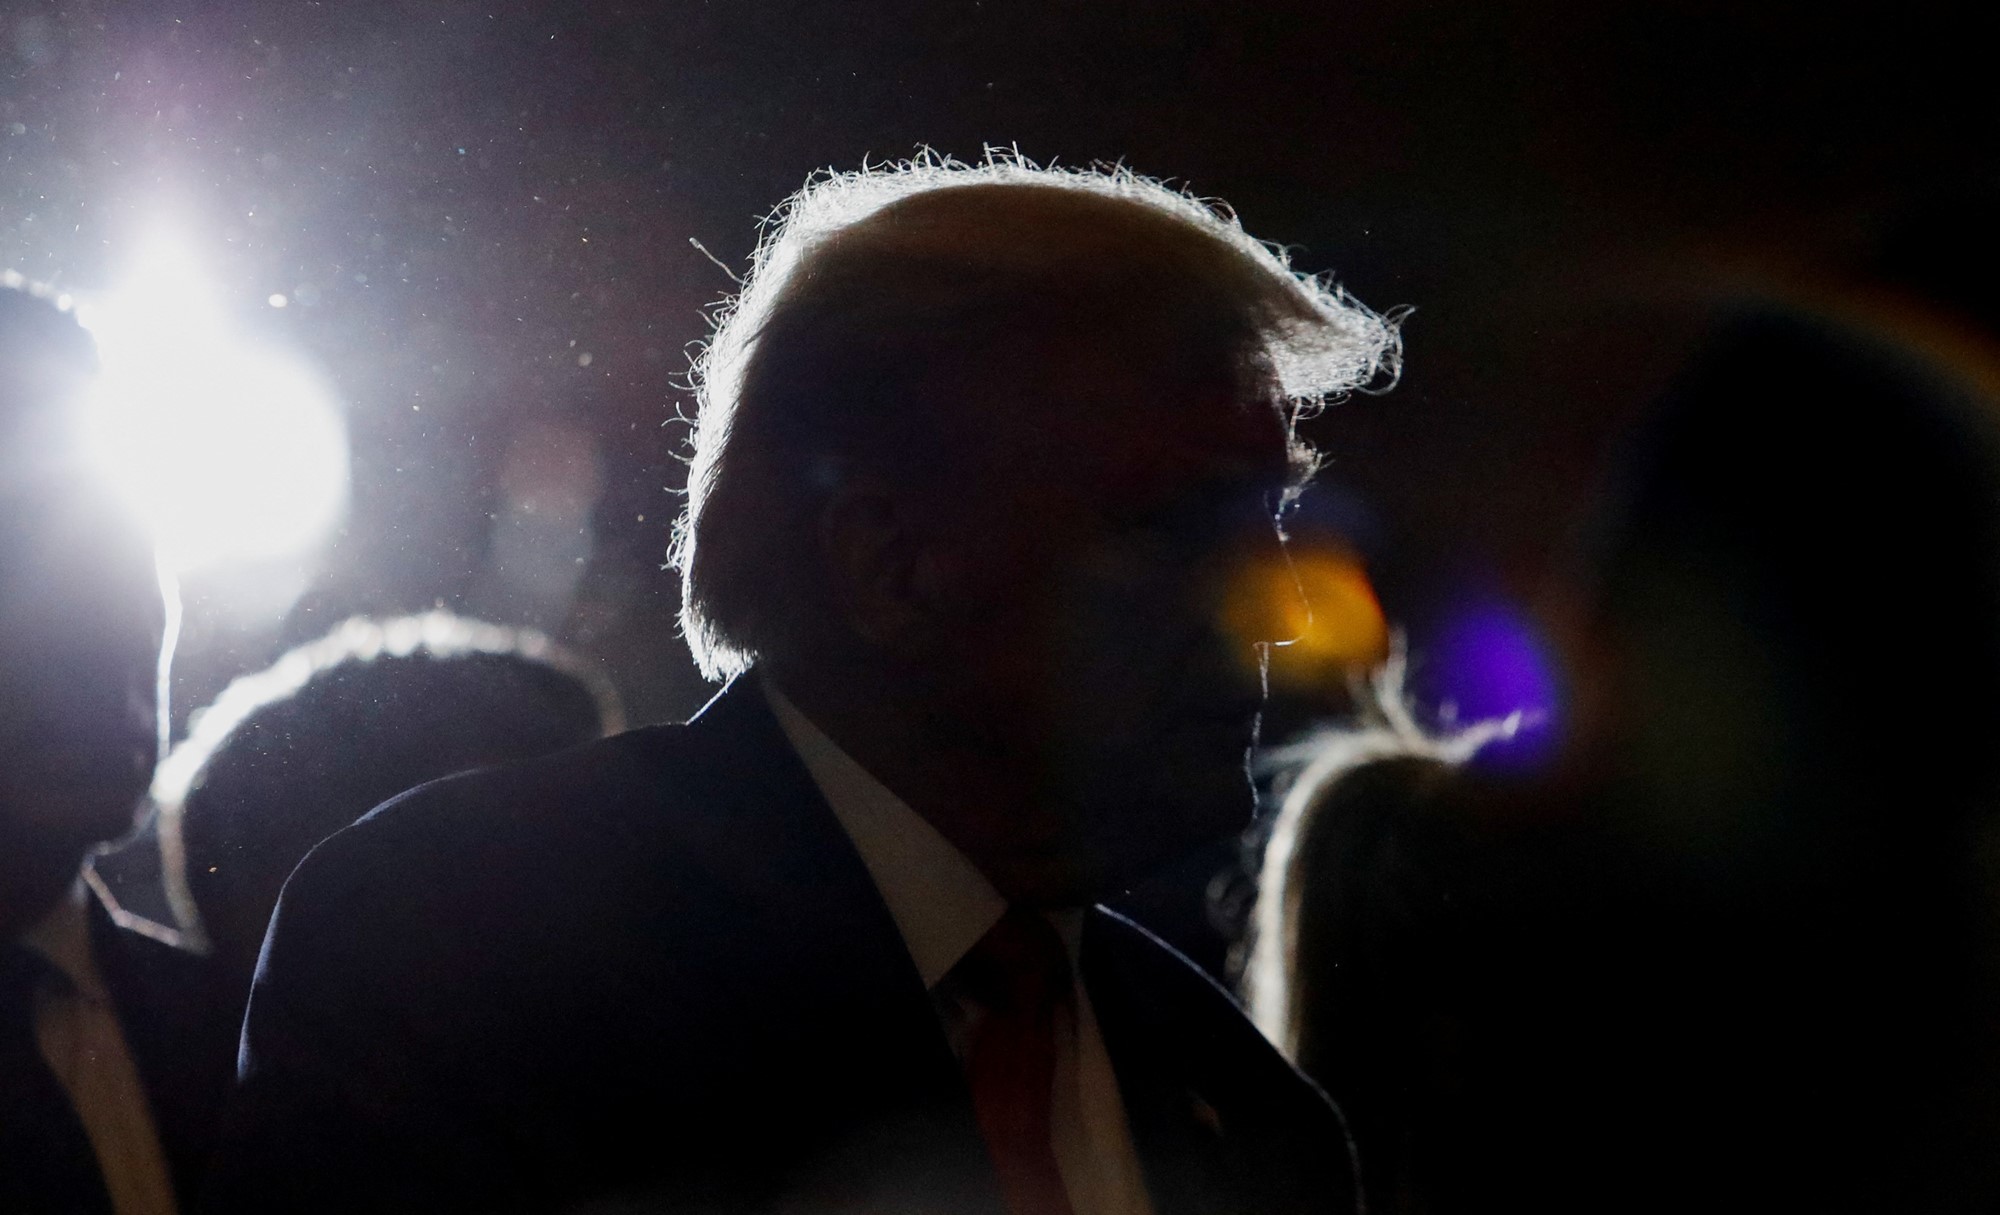 A dark image of Trump where camera flashes show only his silhouette.